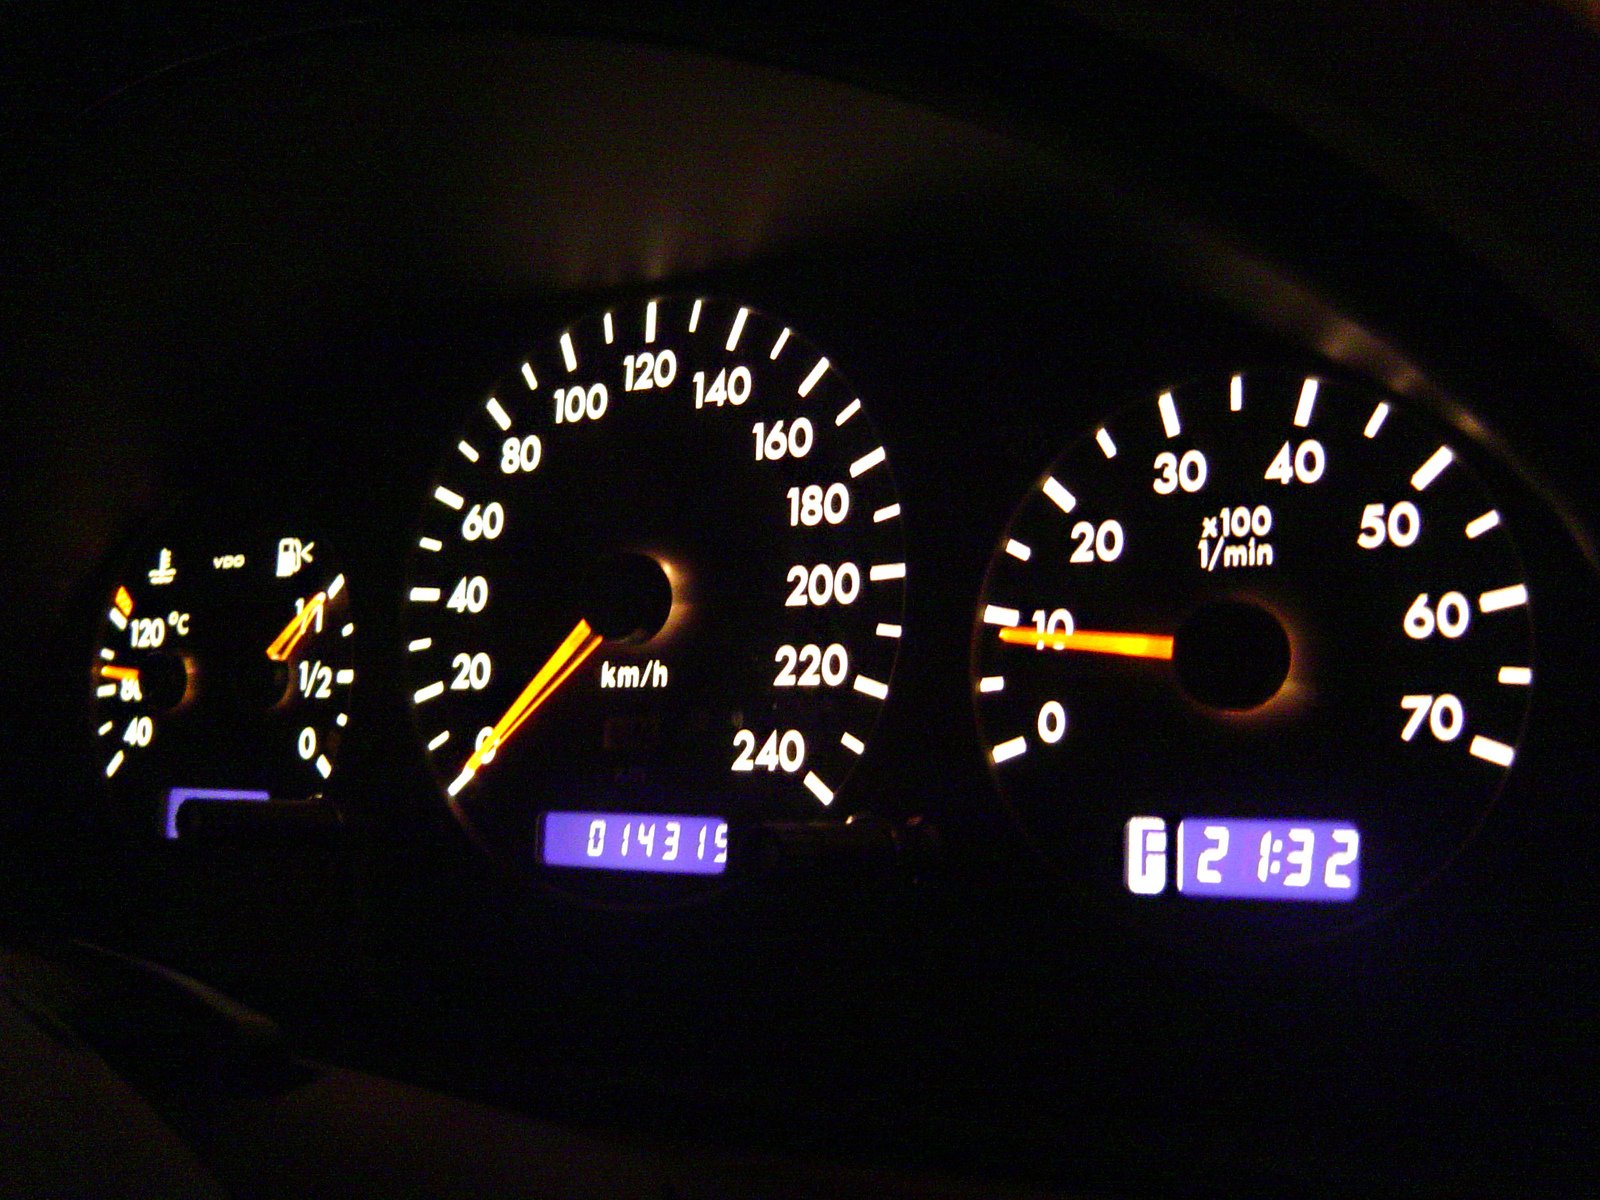 the gauges on the dashboard have very large numbers